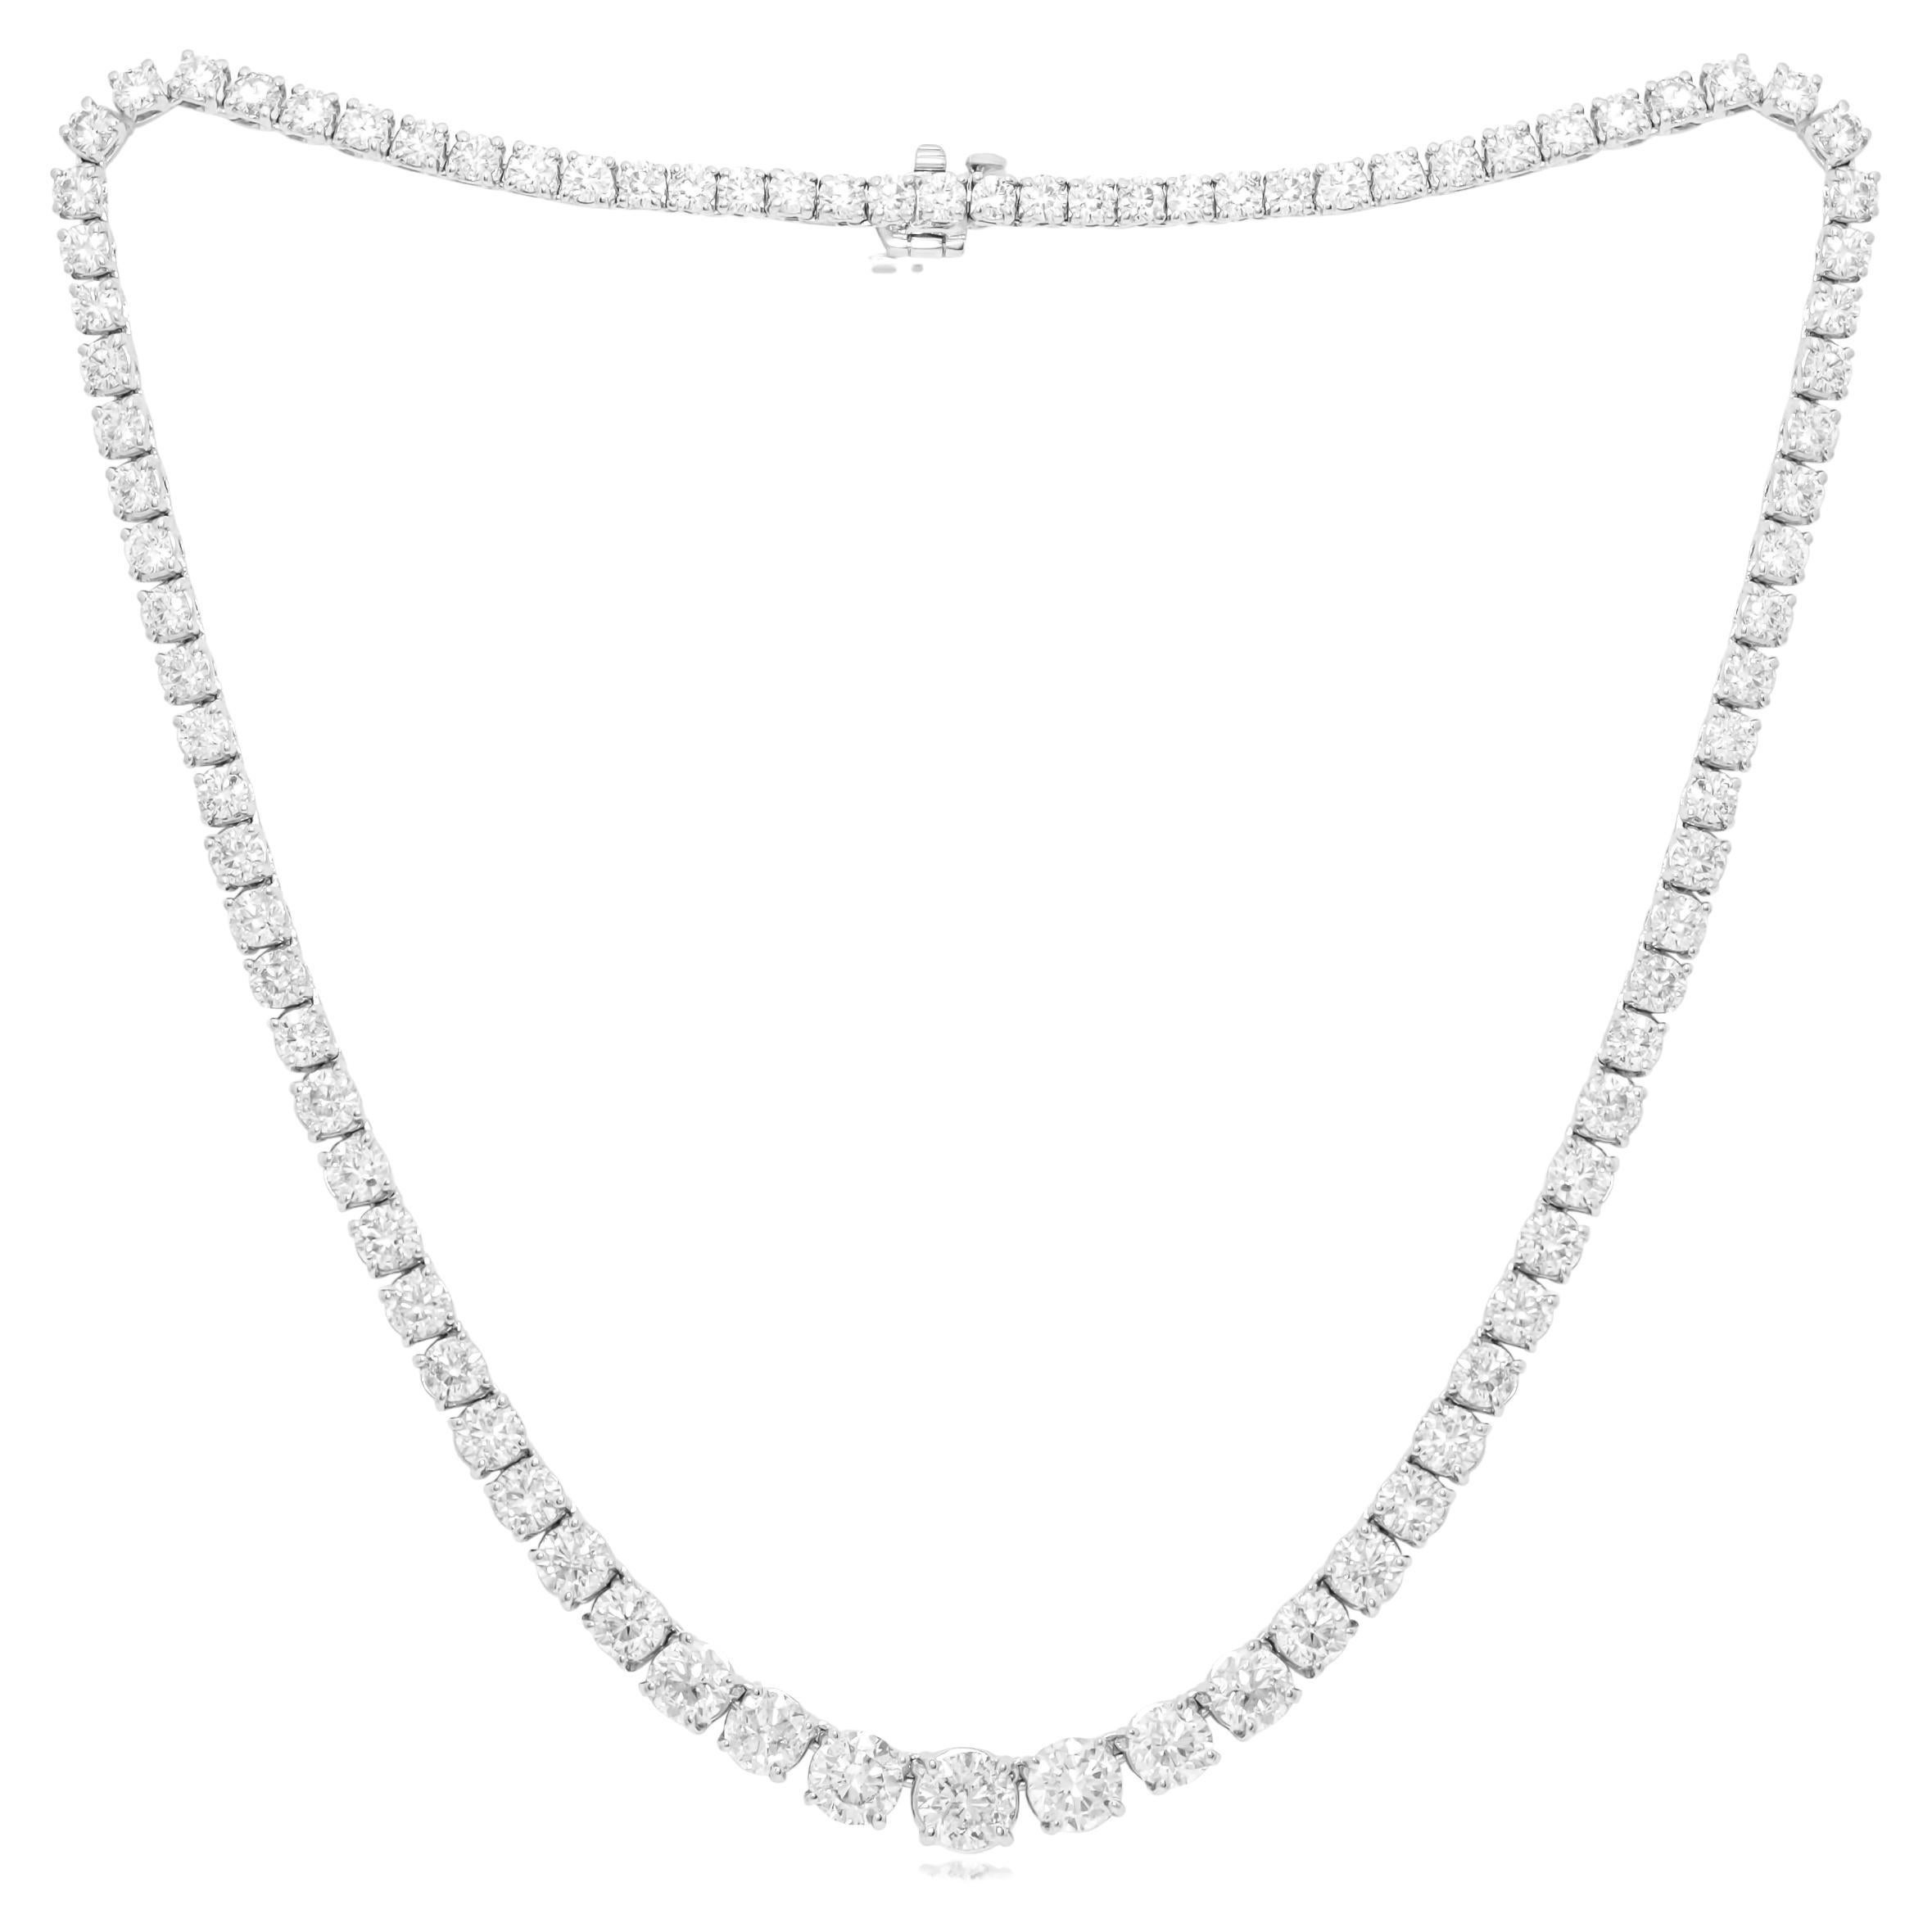 Diana M. 14kt White Gold Graduated Riveira Tennis Necklace  17.60 cts 4 prong